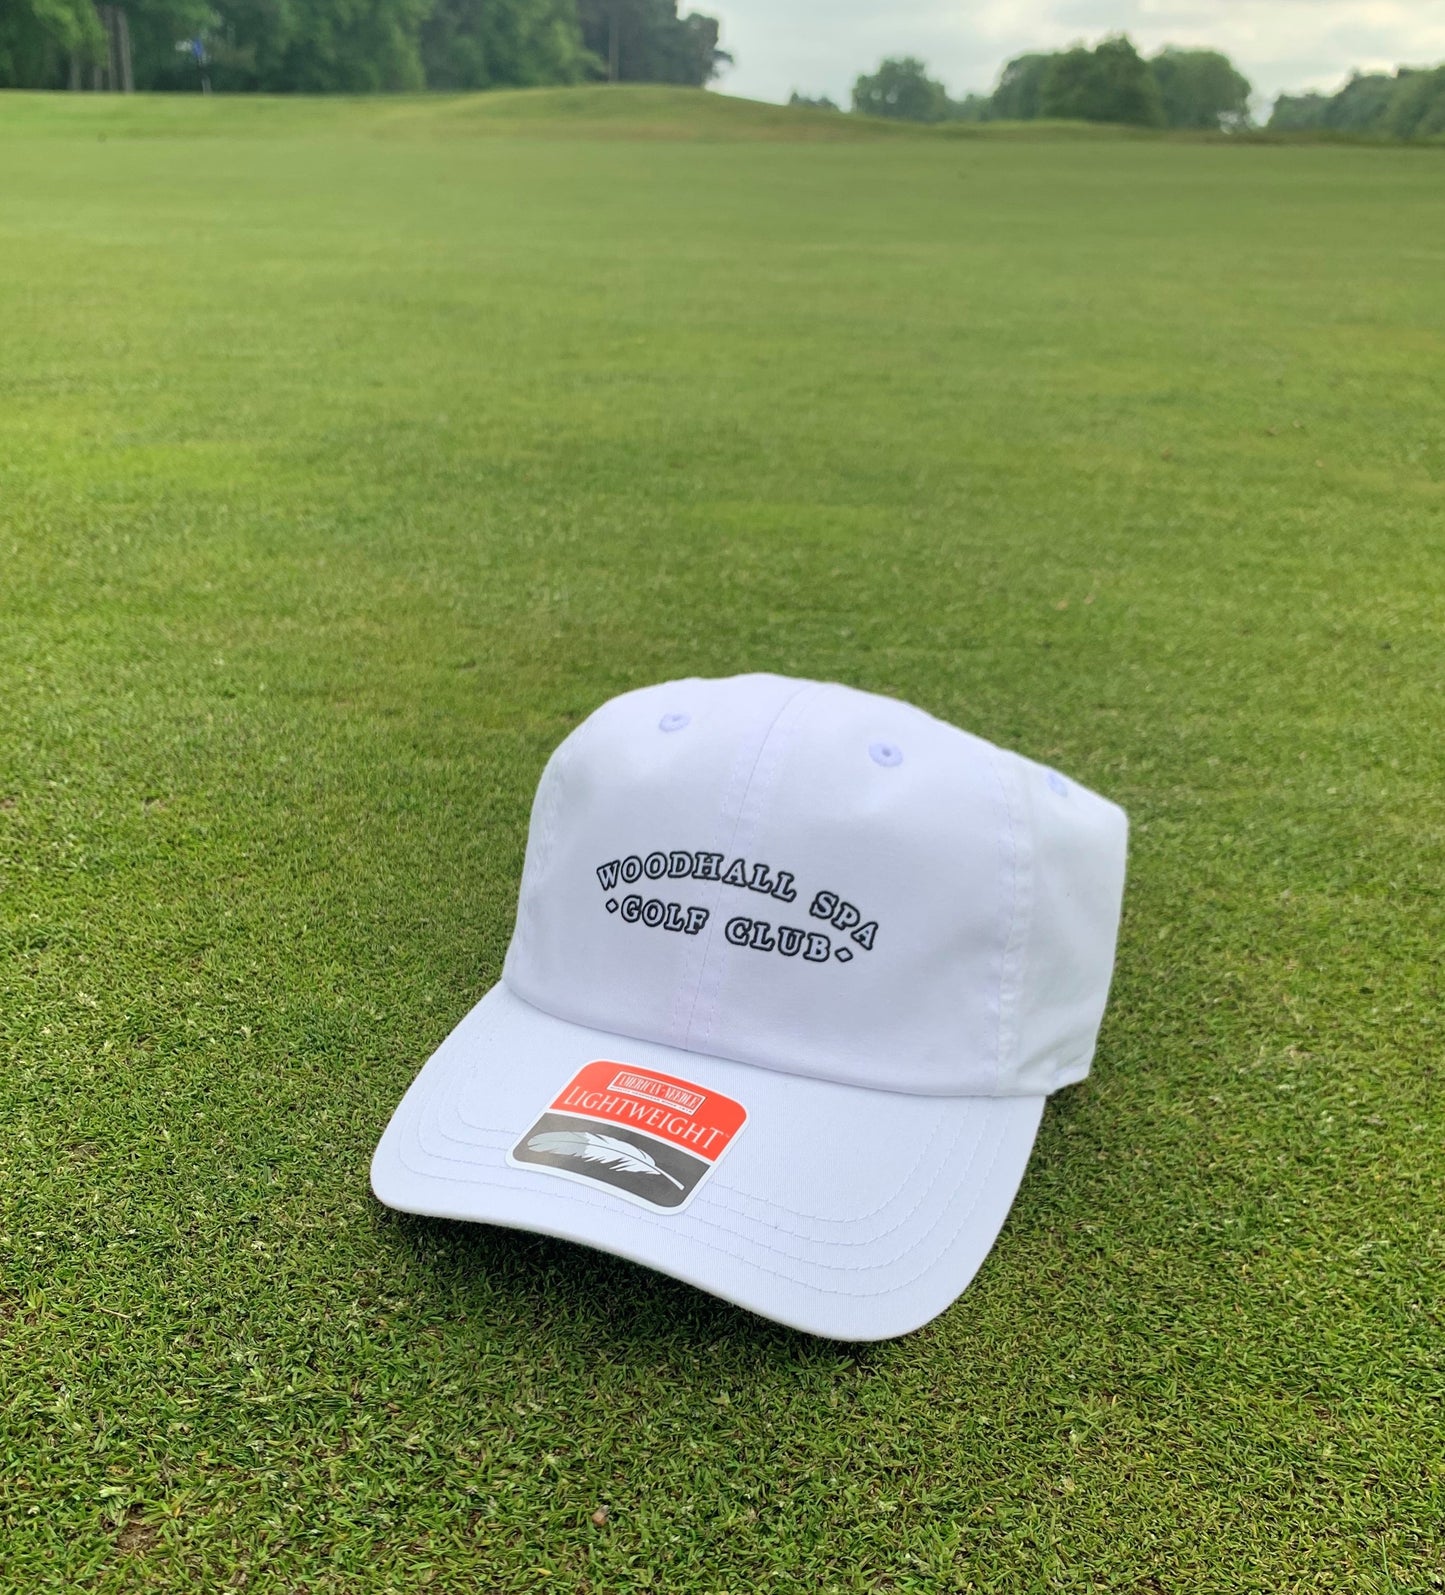 Woodhall Spa Crested Cap